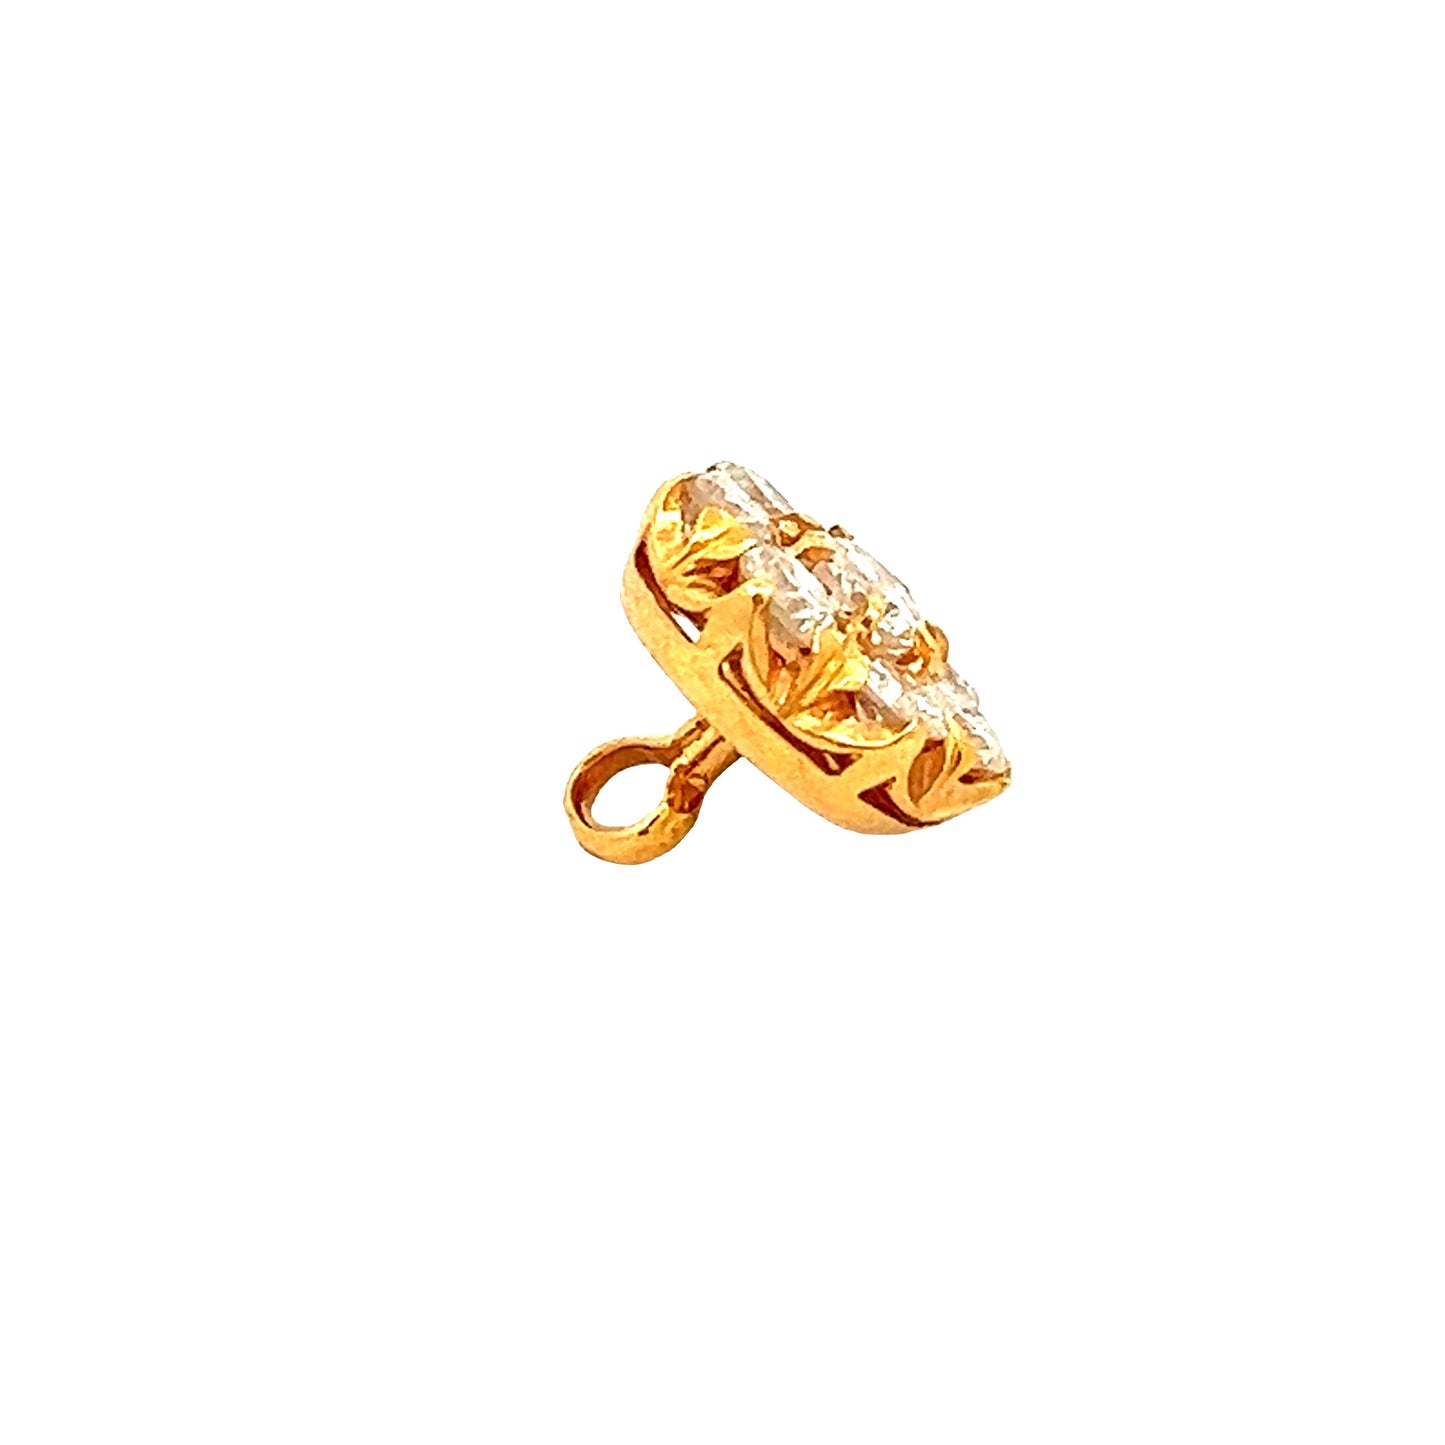 GOLD STONE PENDANT ( 18K ) ( 1.78g ) - P000063 Chain sold separately